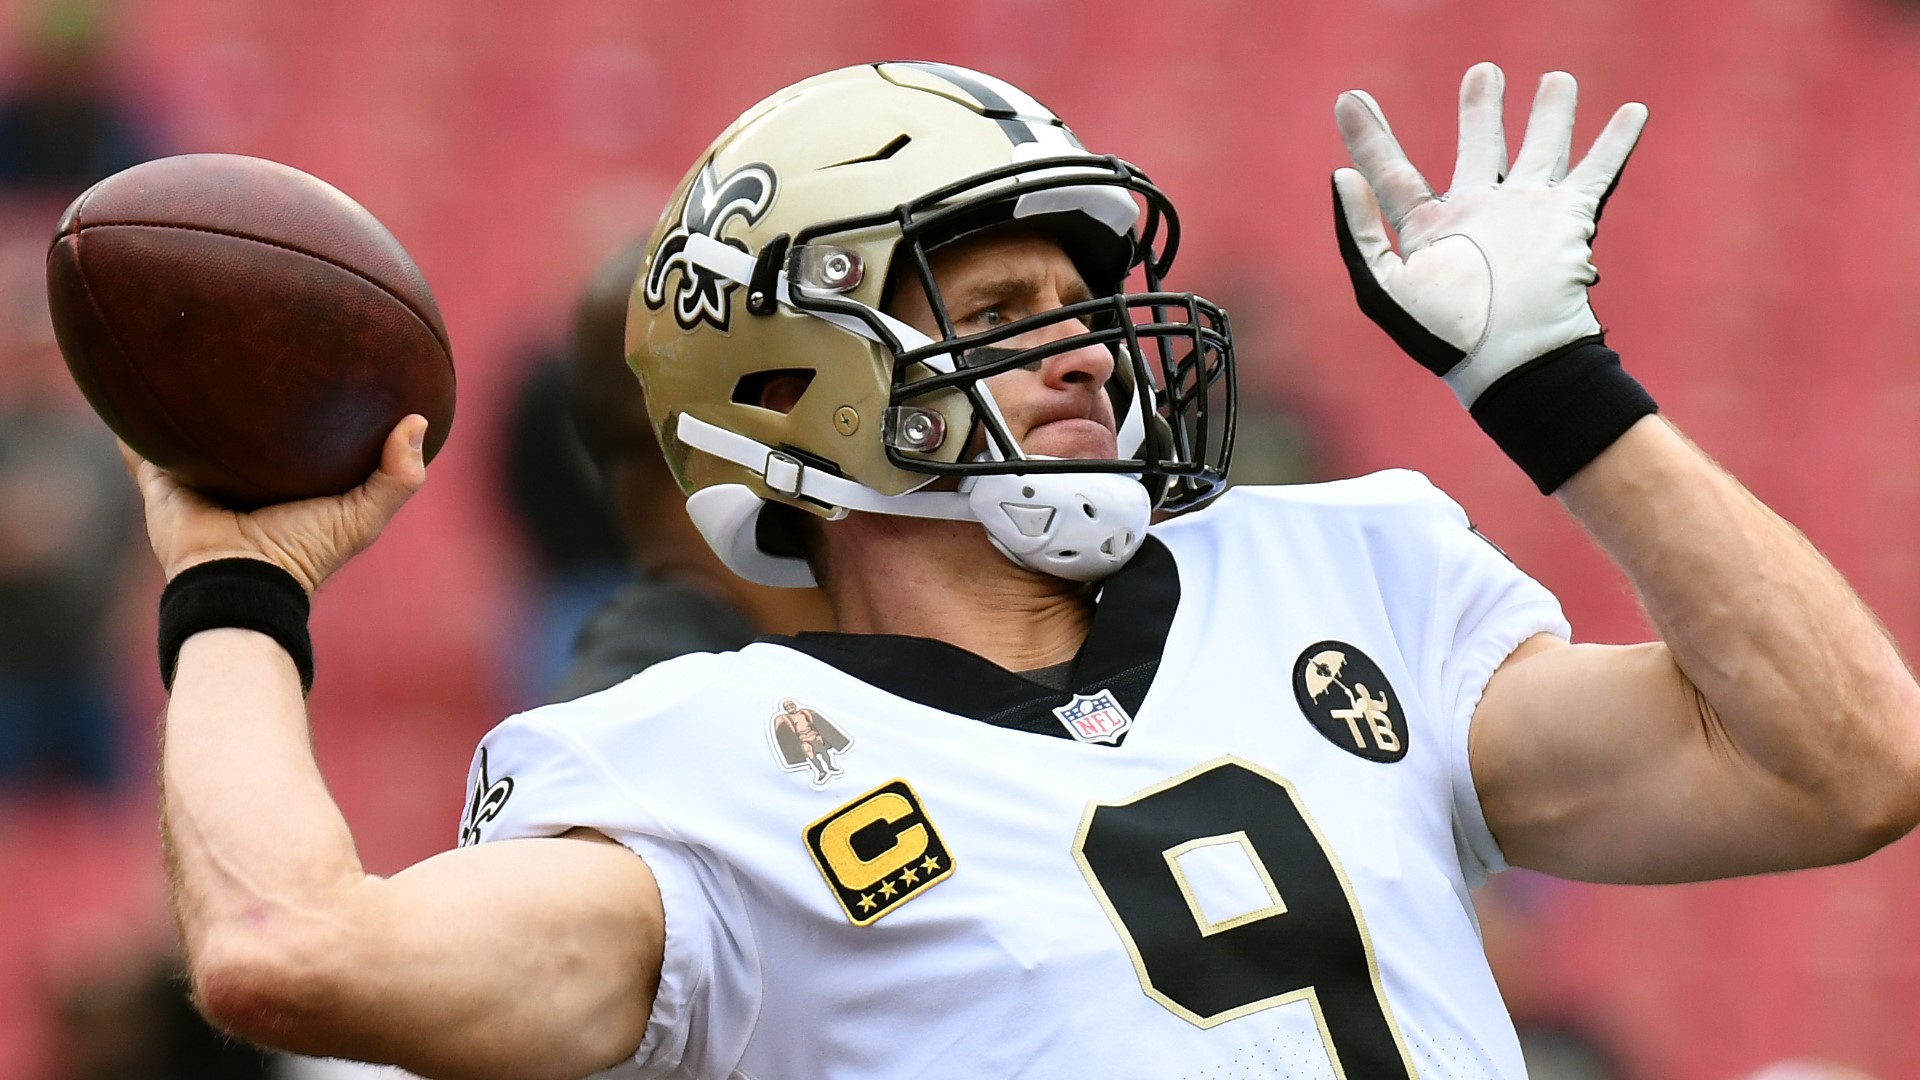 With their playoff hopes on the line, the Carolina Panthers will host the New Orleans Saints on Monday Night Football. Can Luke Kuechly and company slow down Drew Brees and the potent New Orleans offense to keep their postseason dreams alive?